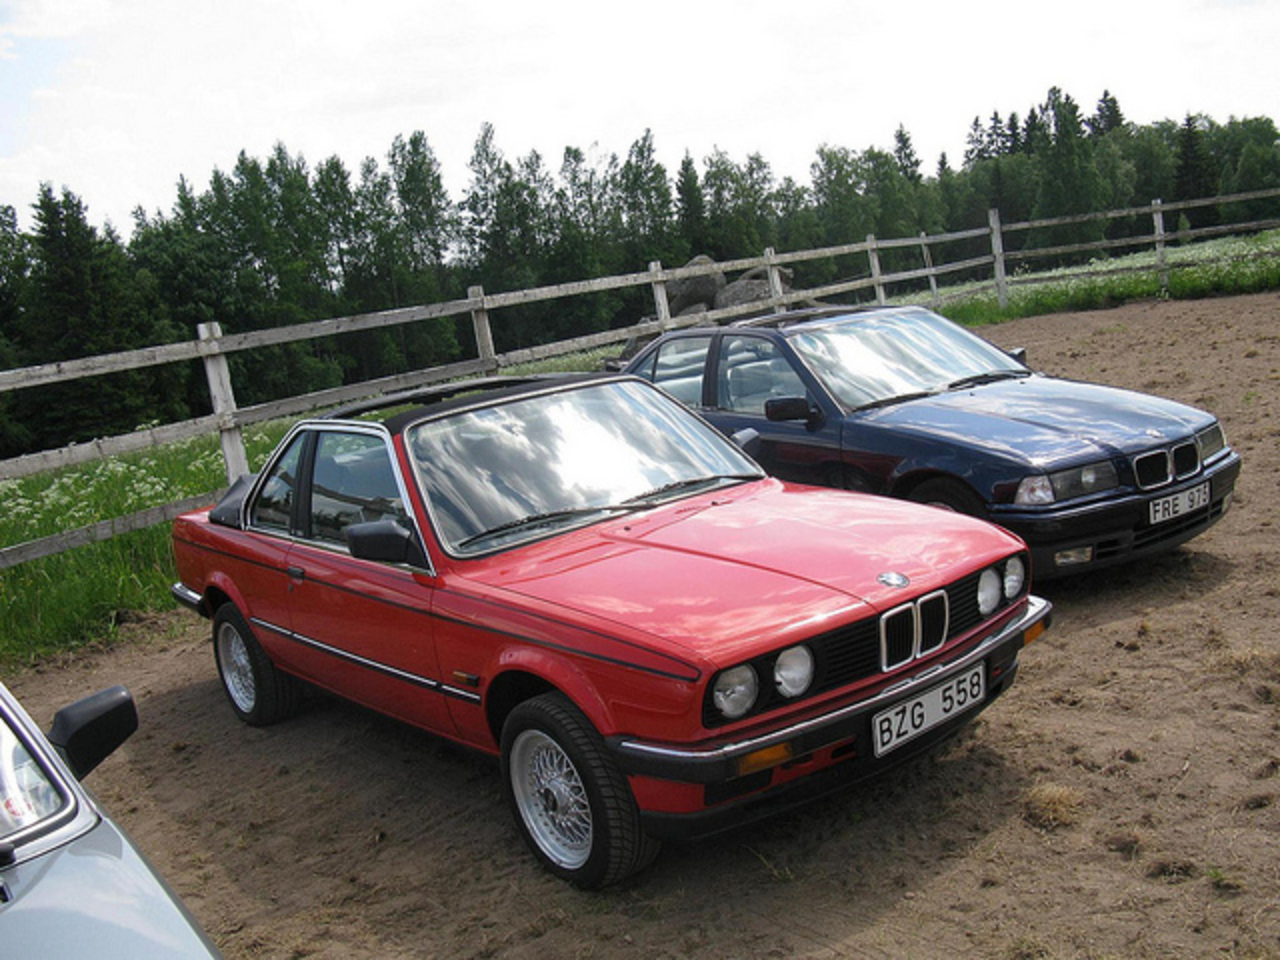 Flickr: The E30 Pool